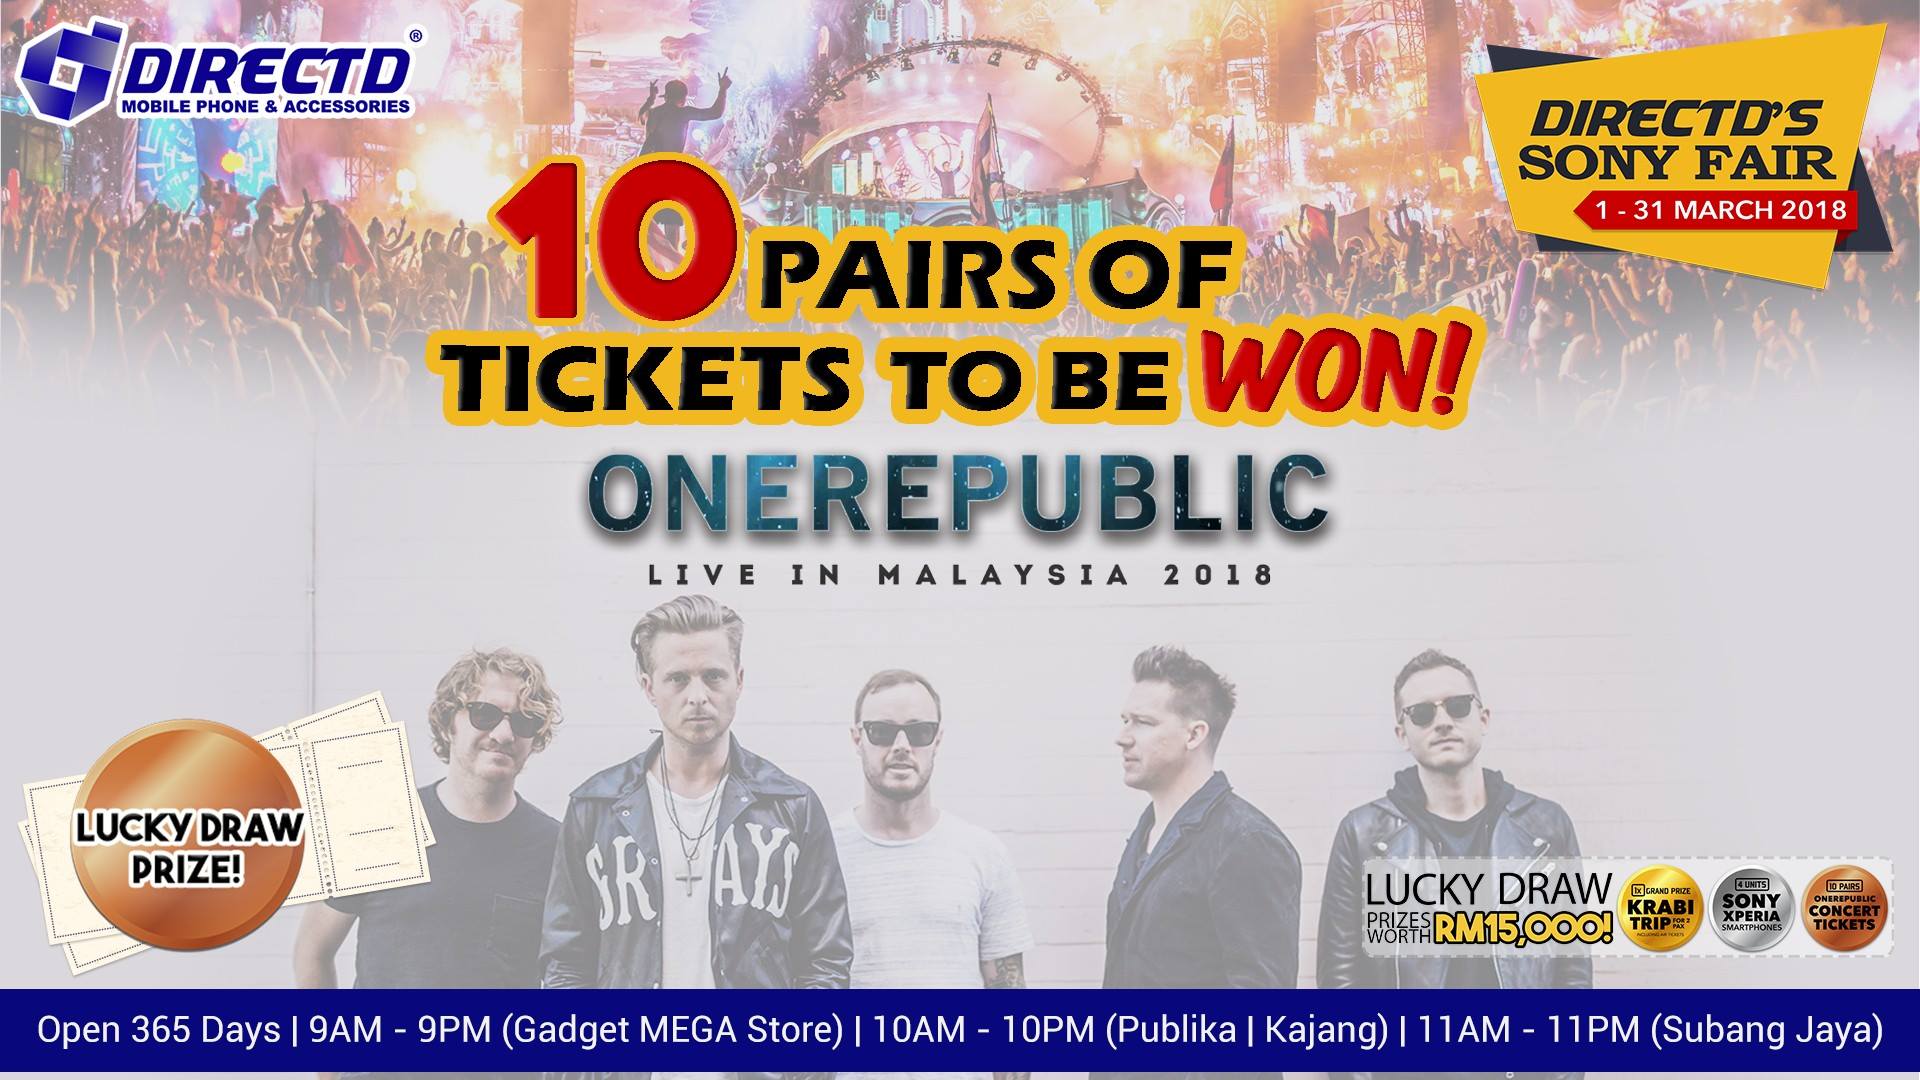 Buy discounted Sony Xperia phones on DirectD and stand a chance to win free tickets to OneRepublic concert, a Thailand trip and more